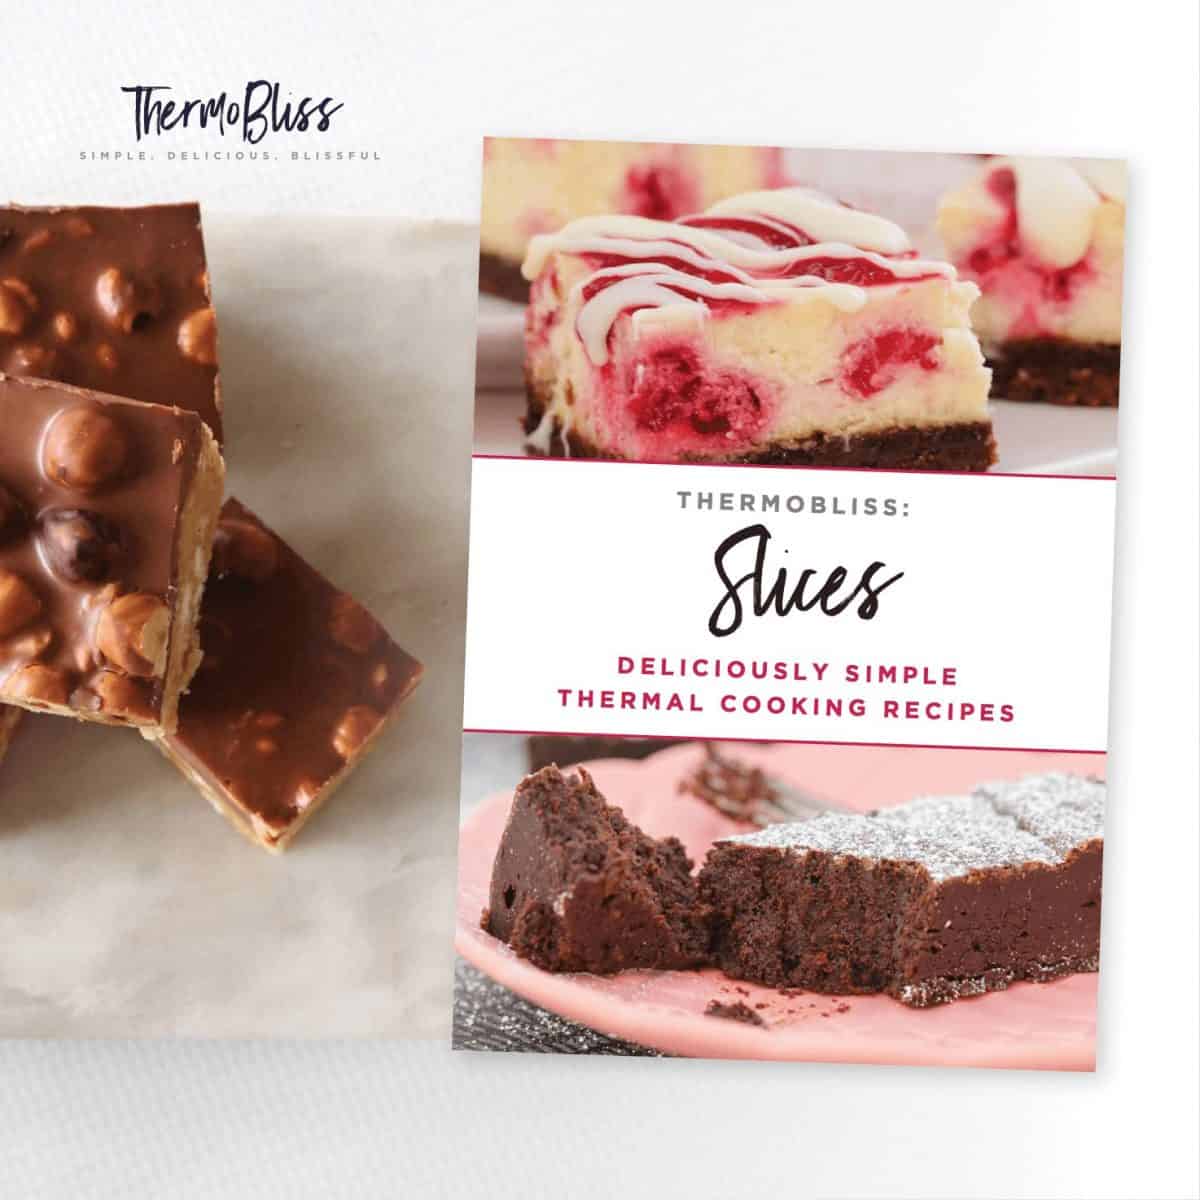 A book cover for a recipe book - Thermobliss Slices, with pieces of a chocolate slice beside